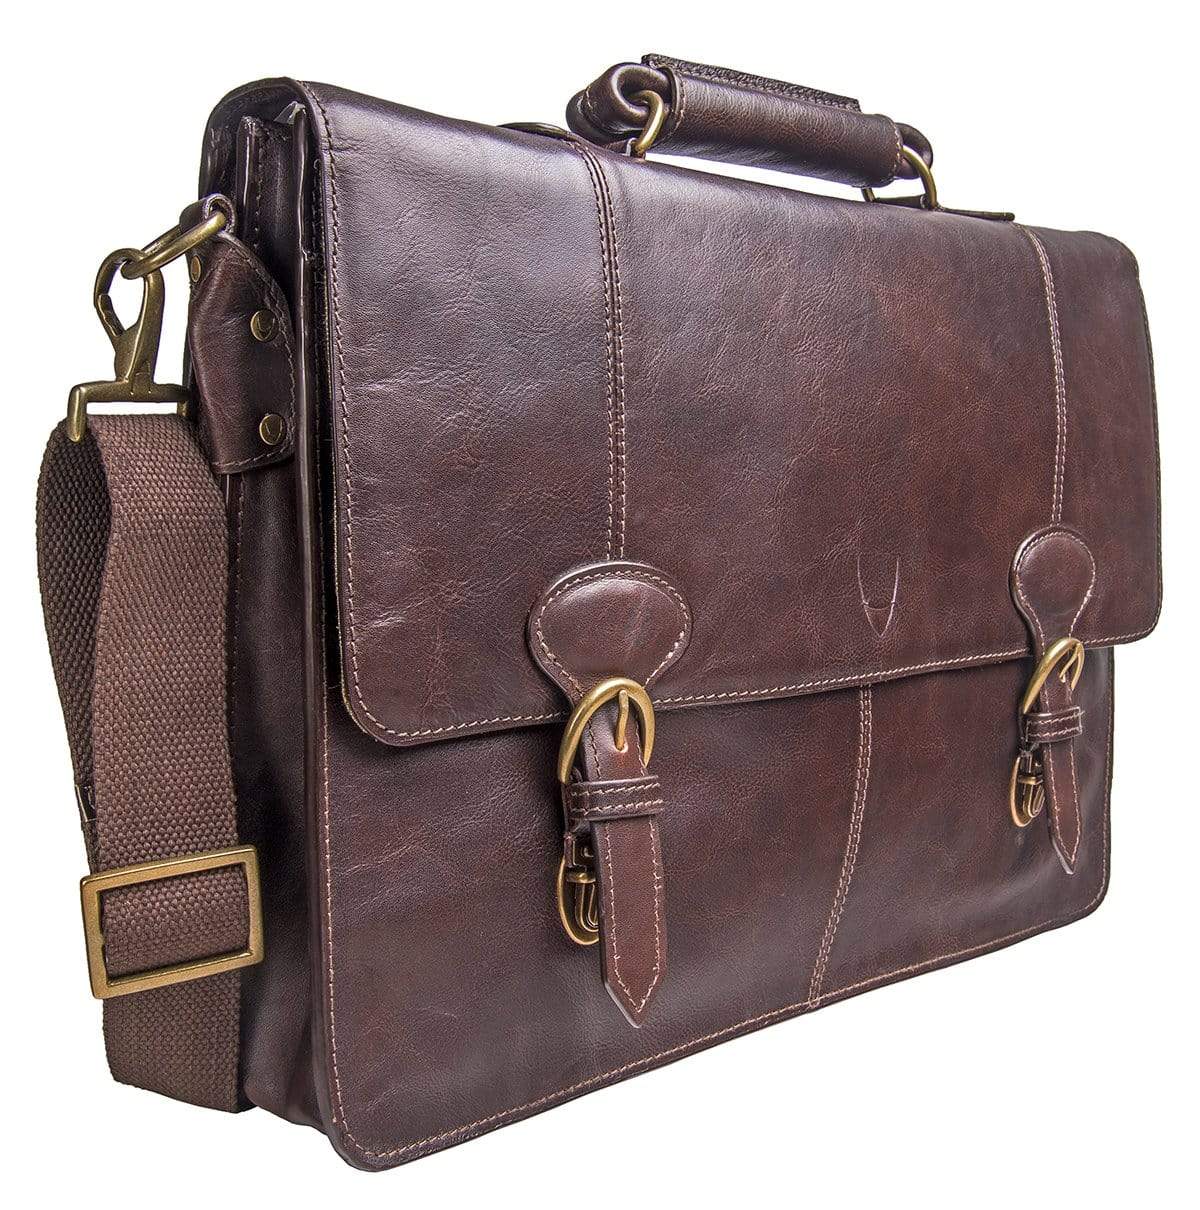 Hidesign Leather Bags - The Best Hand-Crafted Leather Bags For You